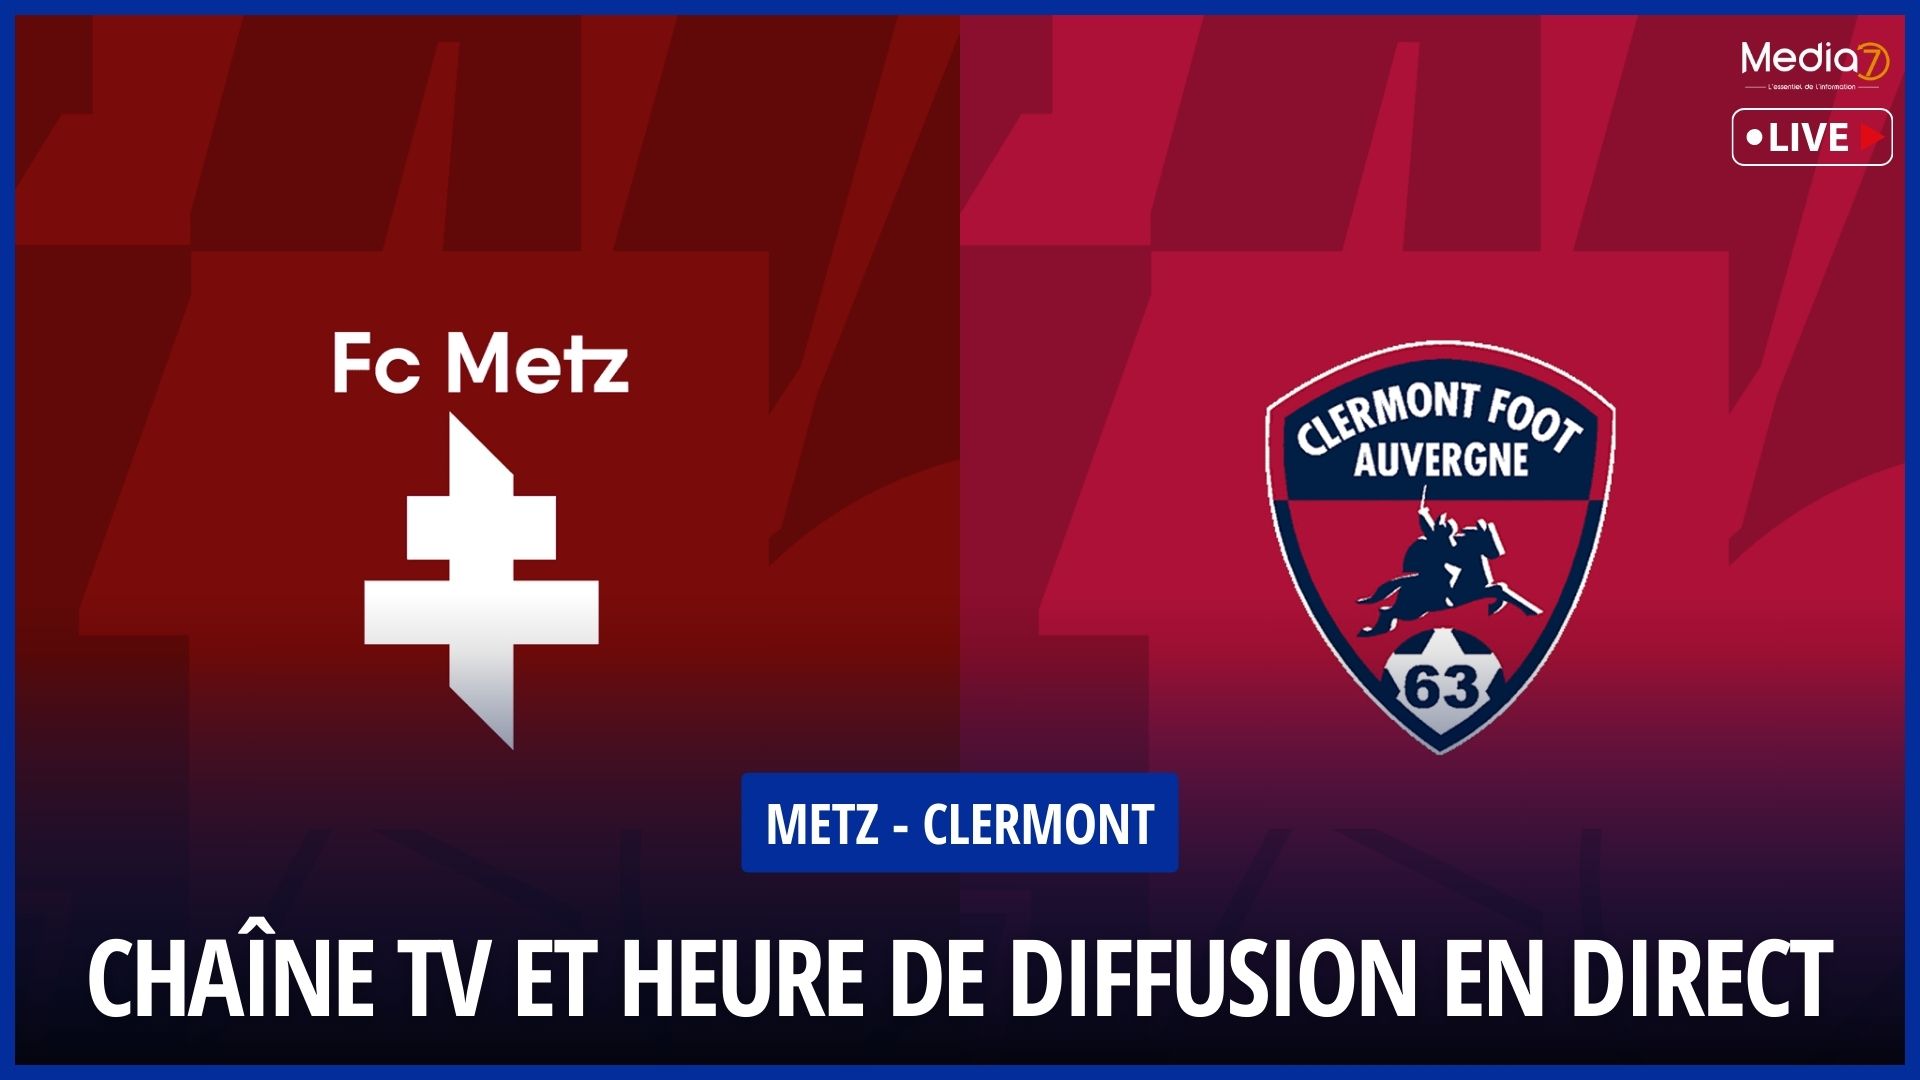 Match Metz - Clermont Live: TV Broadcast & Streaming, Schedule and Channel - Media7